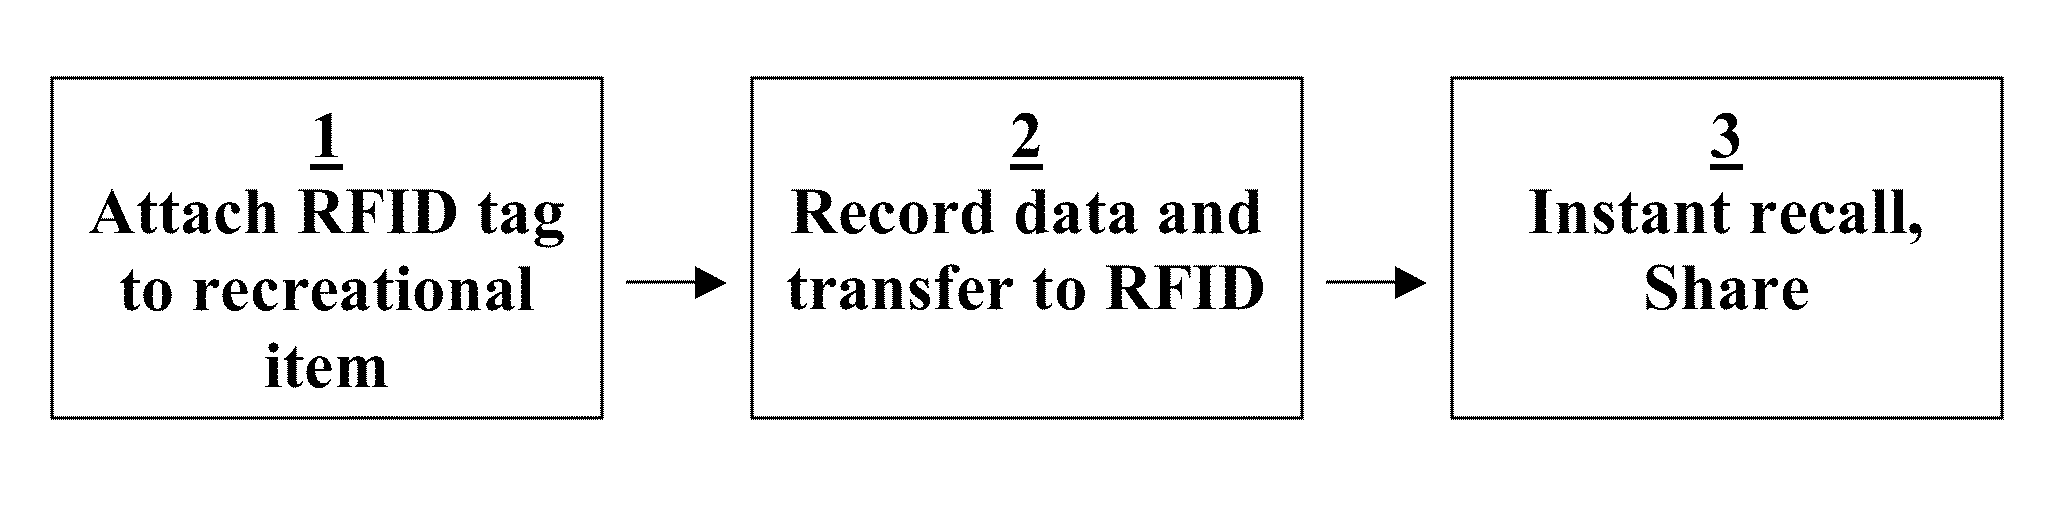 Method to personalize, promote, and distribute multimedia content using radio frequency identification